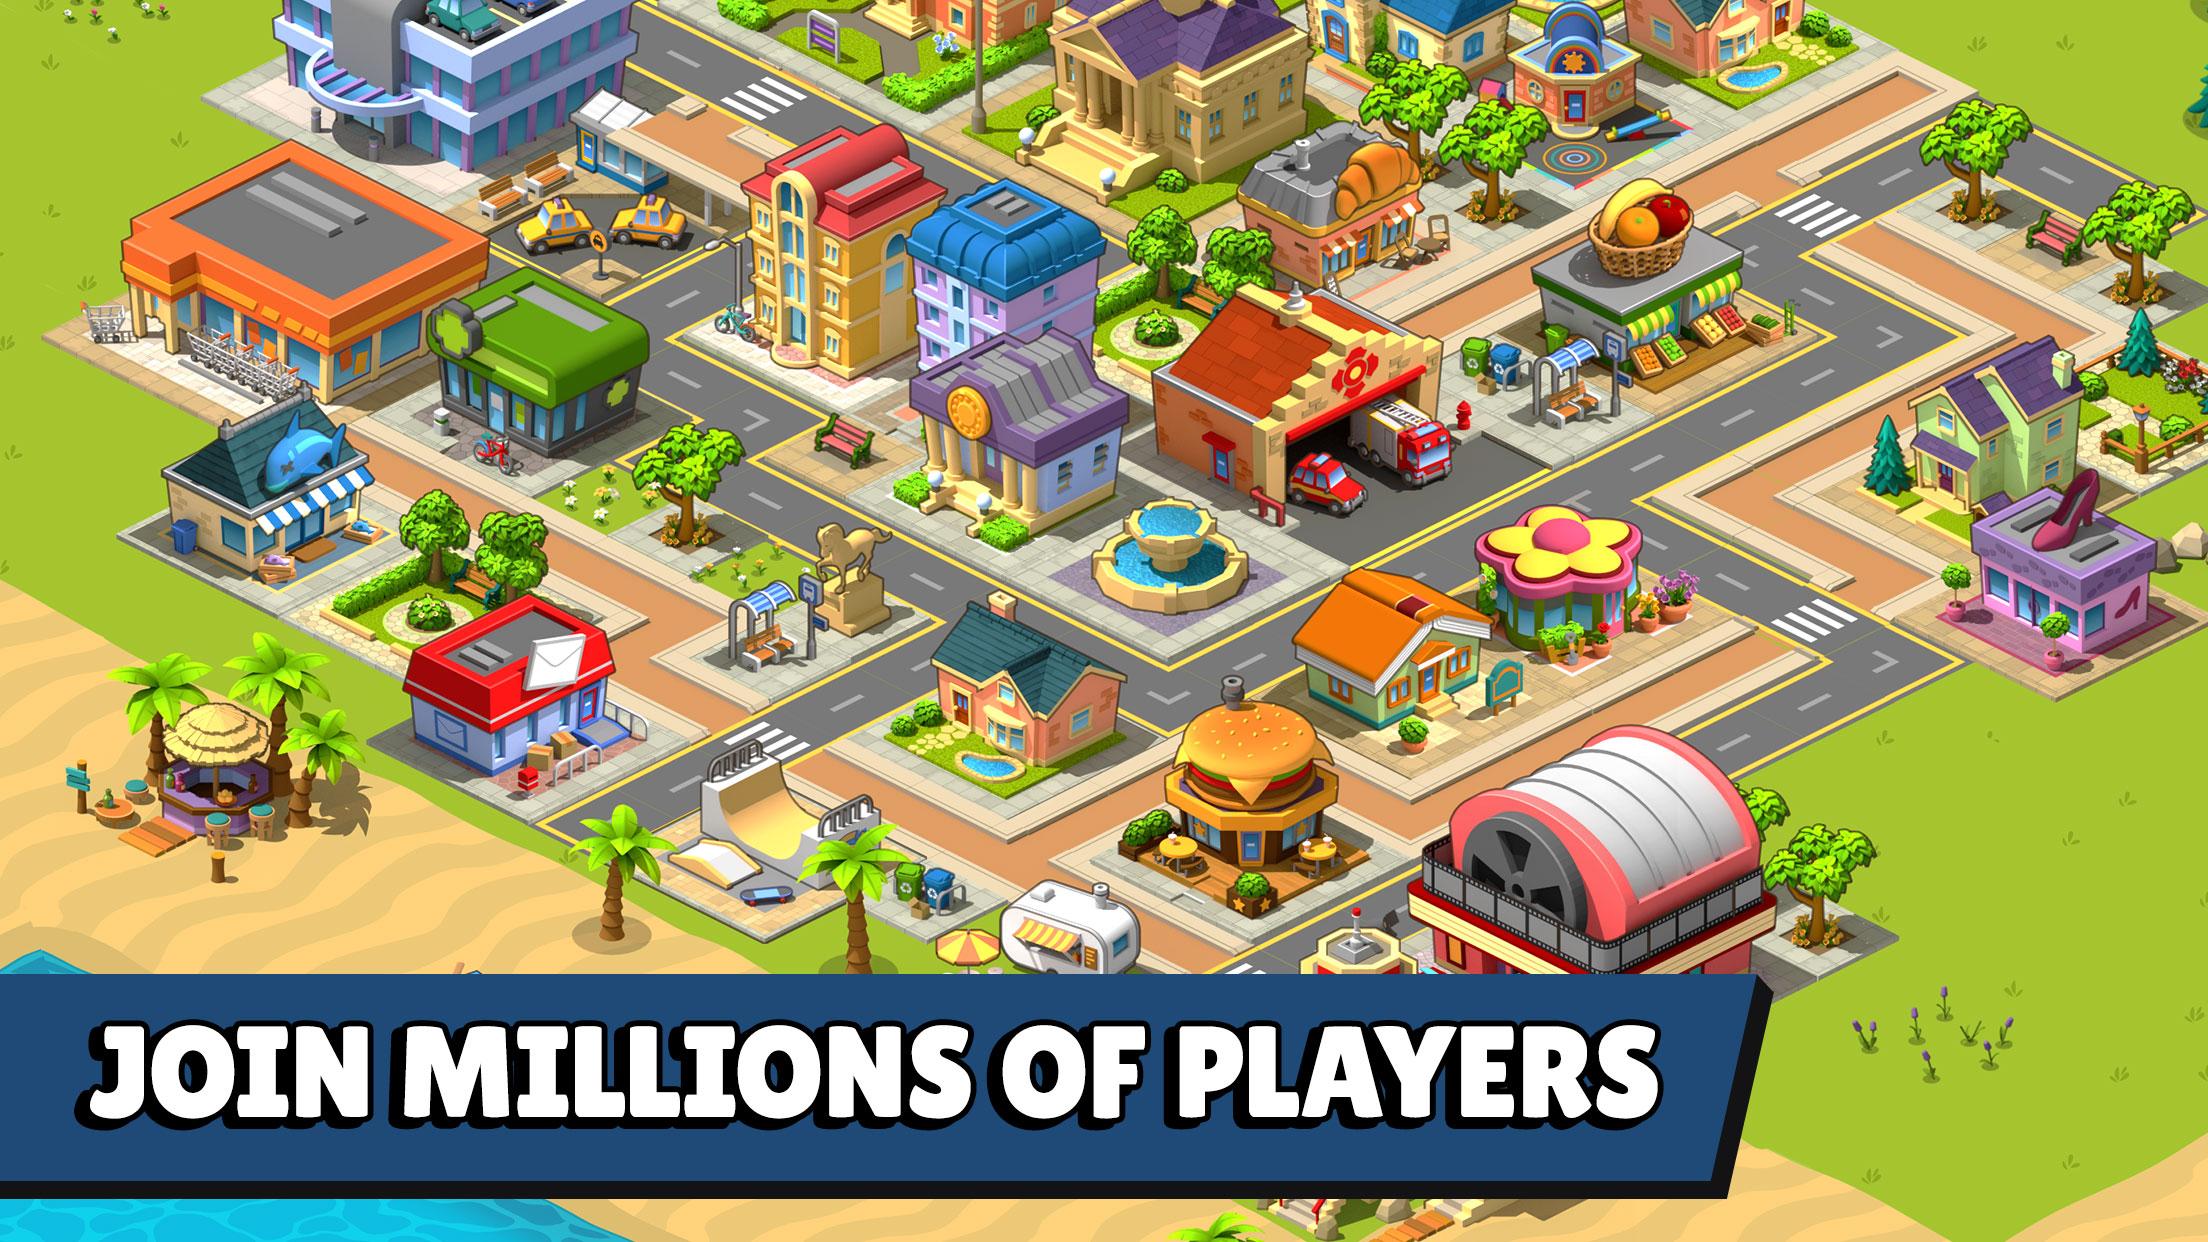 What your city town or village is. Игра Village City. Village City: Island SIM. Village City Town building. Village City Island Simulation games.